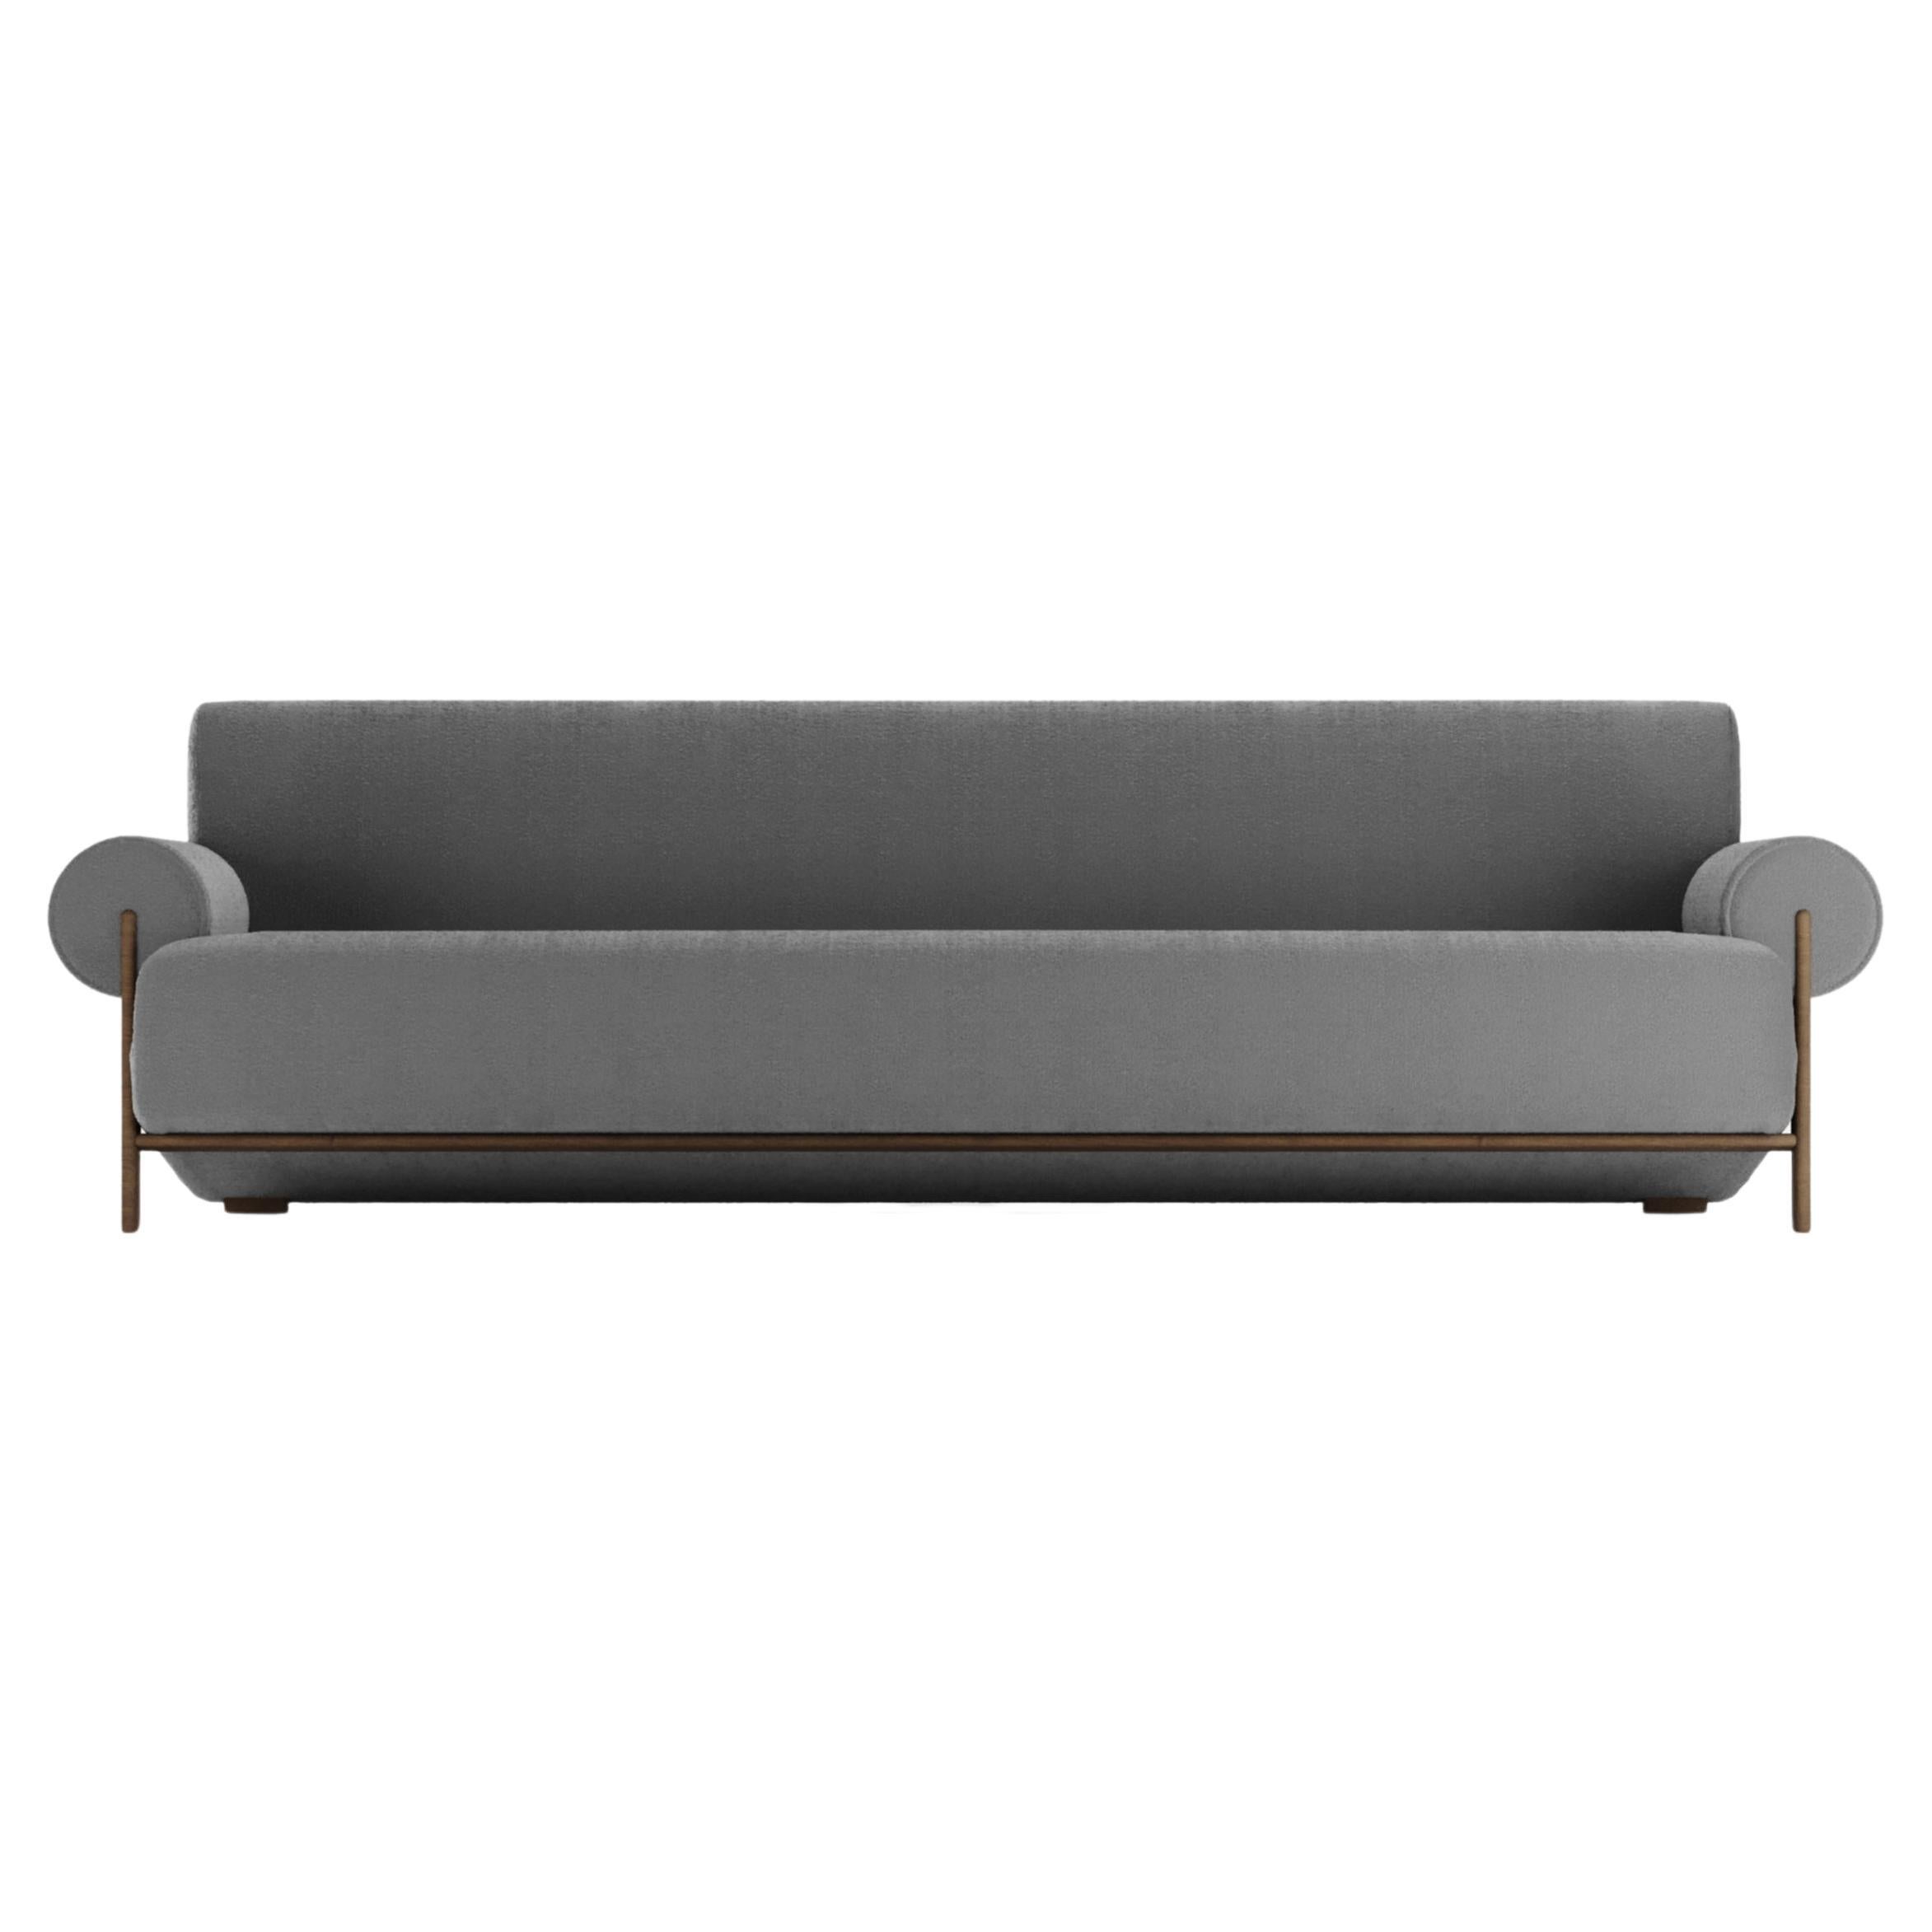 Contemporary Modern Paloma Sofa in Bouclé Charcoal Grey by Collector For Sale